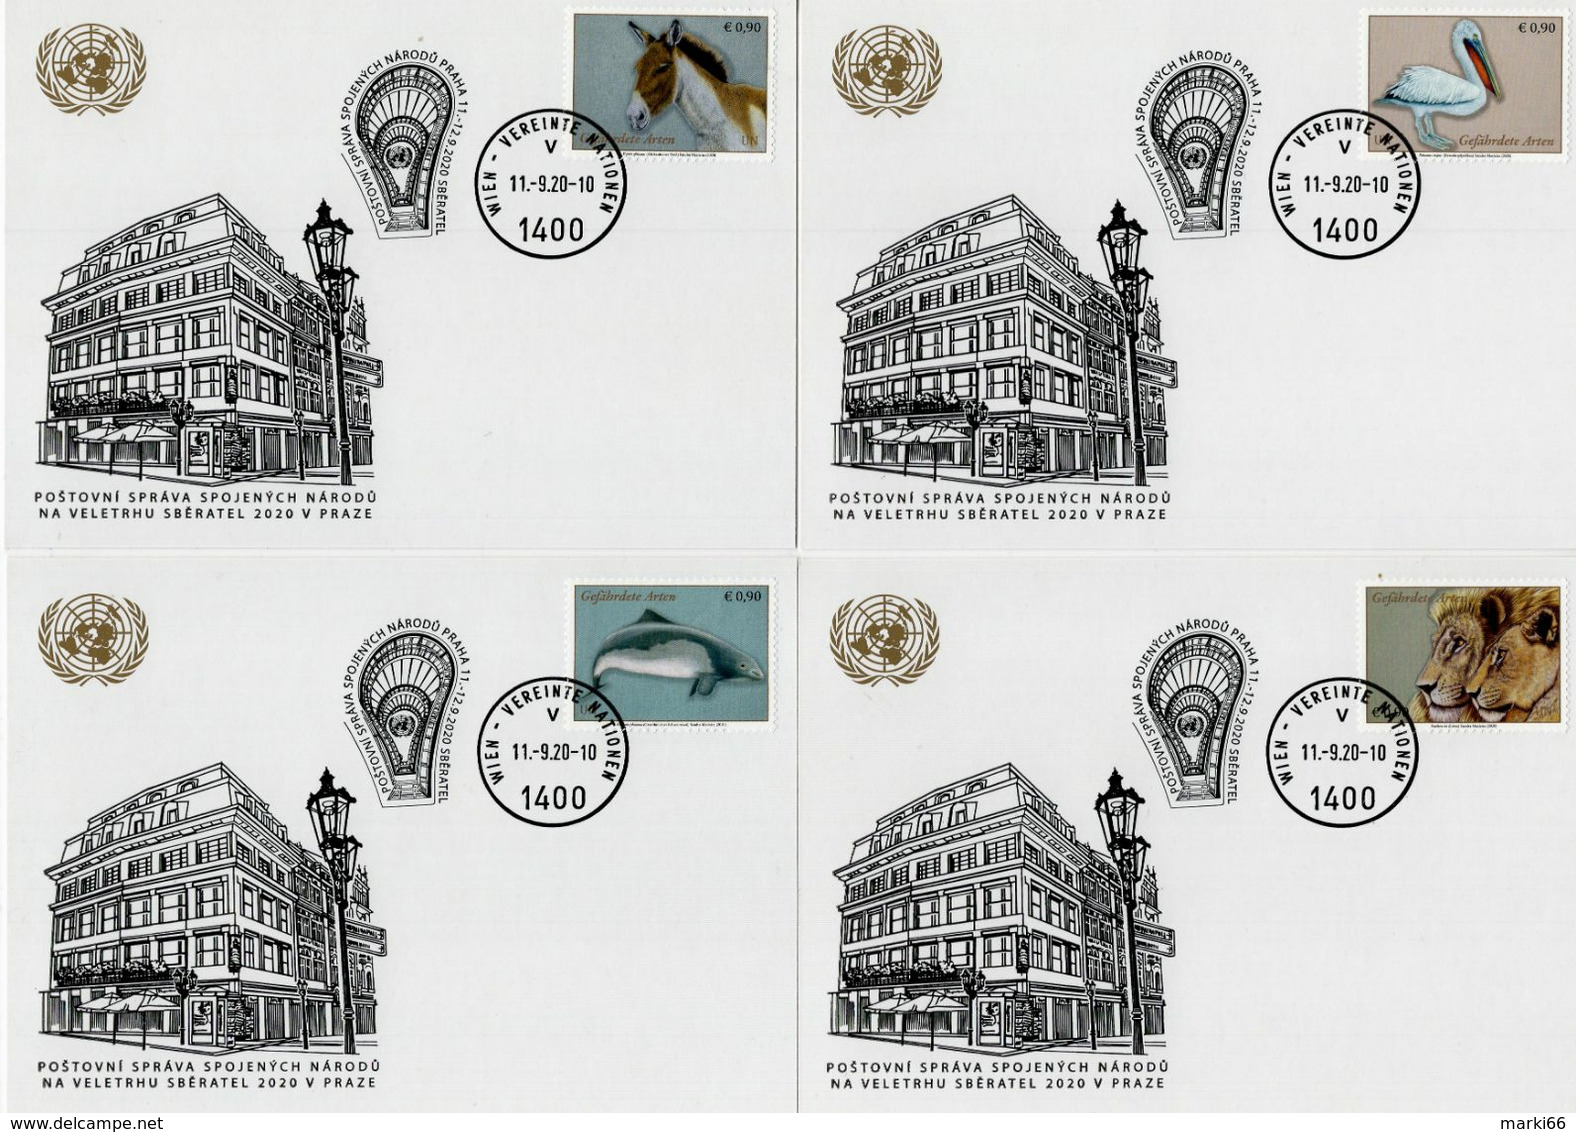 United Nations - 2020 - Vienna - Endangered Species - UN Post At Sberatel Fair - Stamped Postcards Set With Postmark - Storia Postale